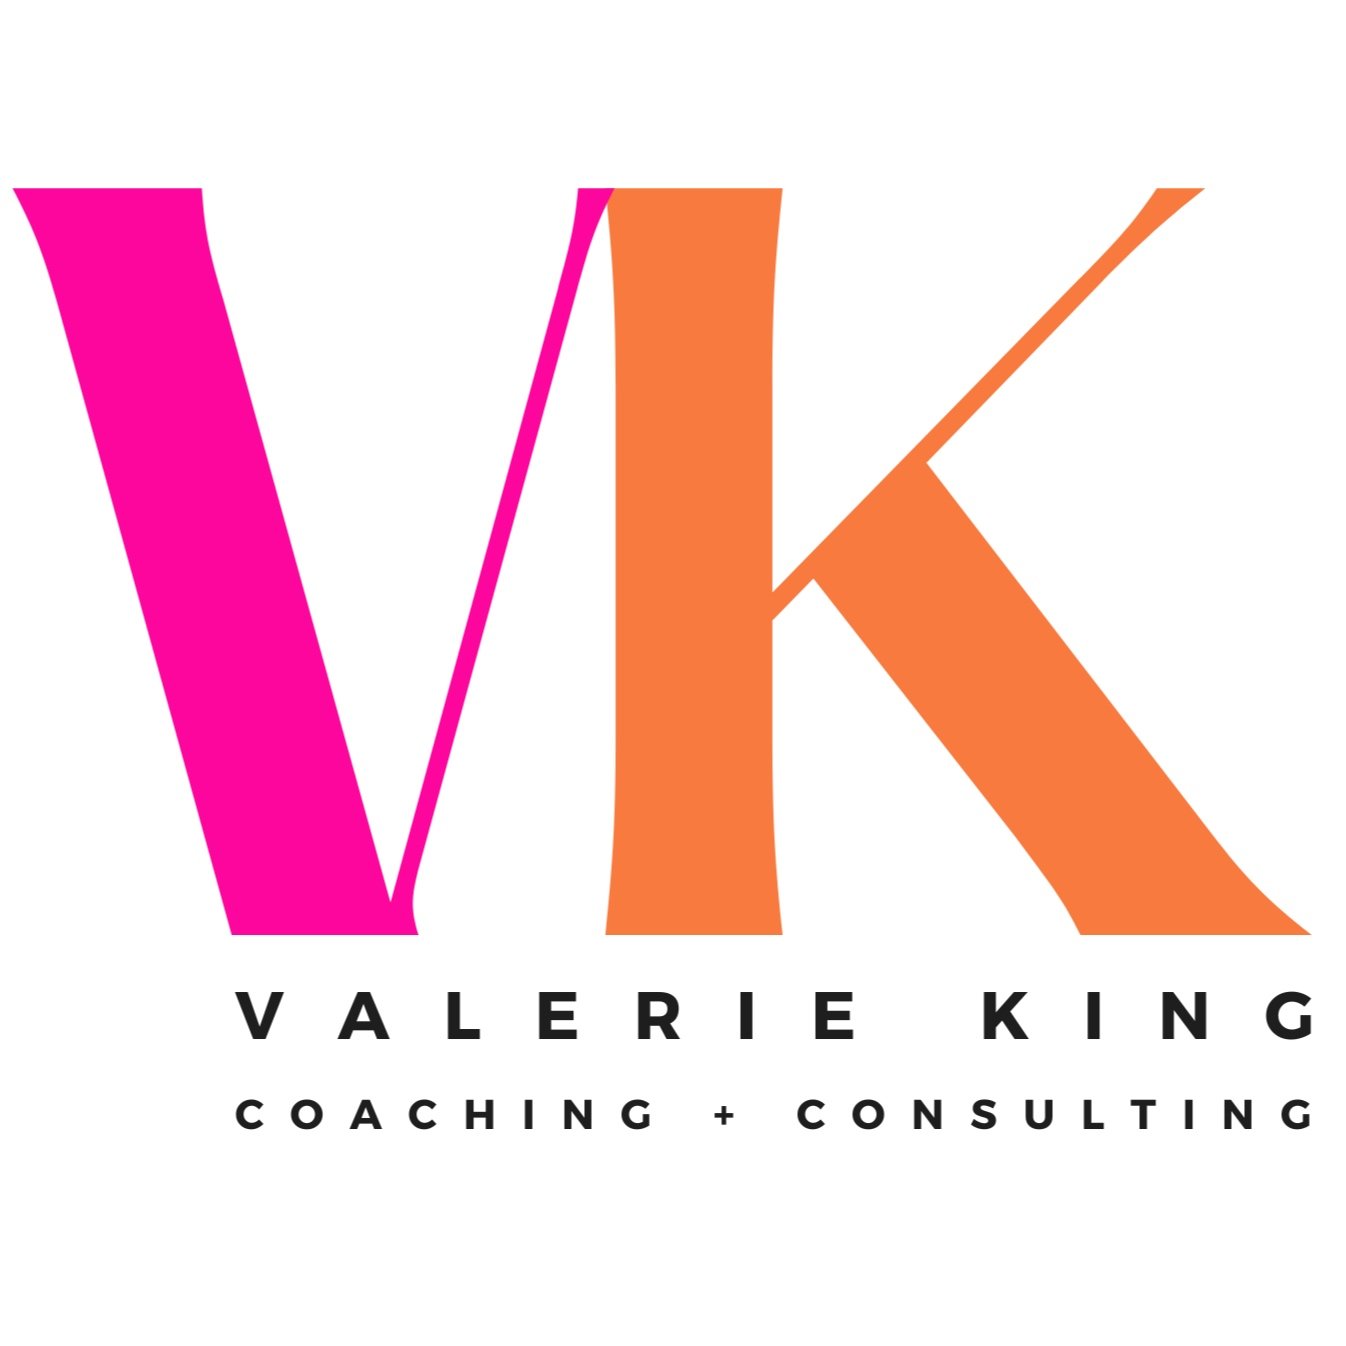 Valerie King Coaching + Consulting